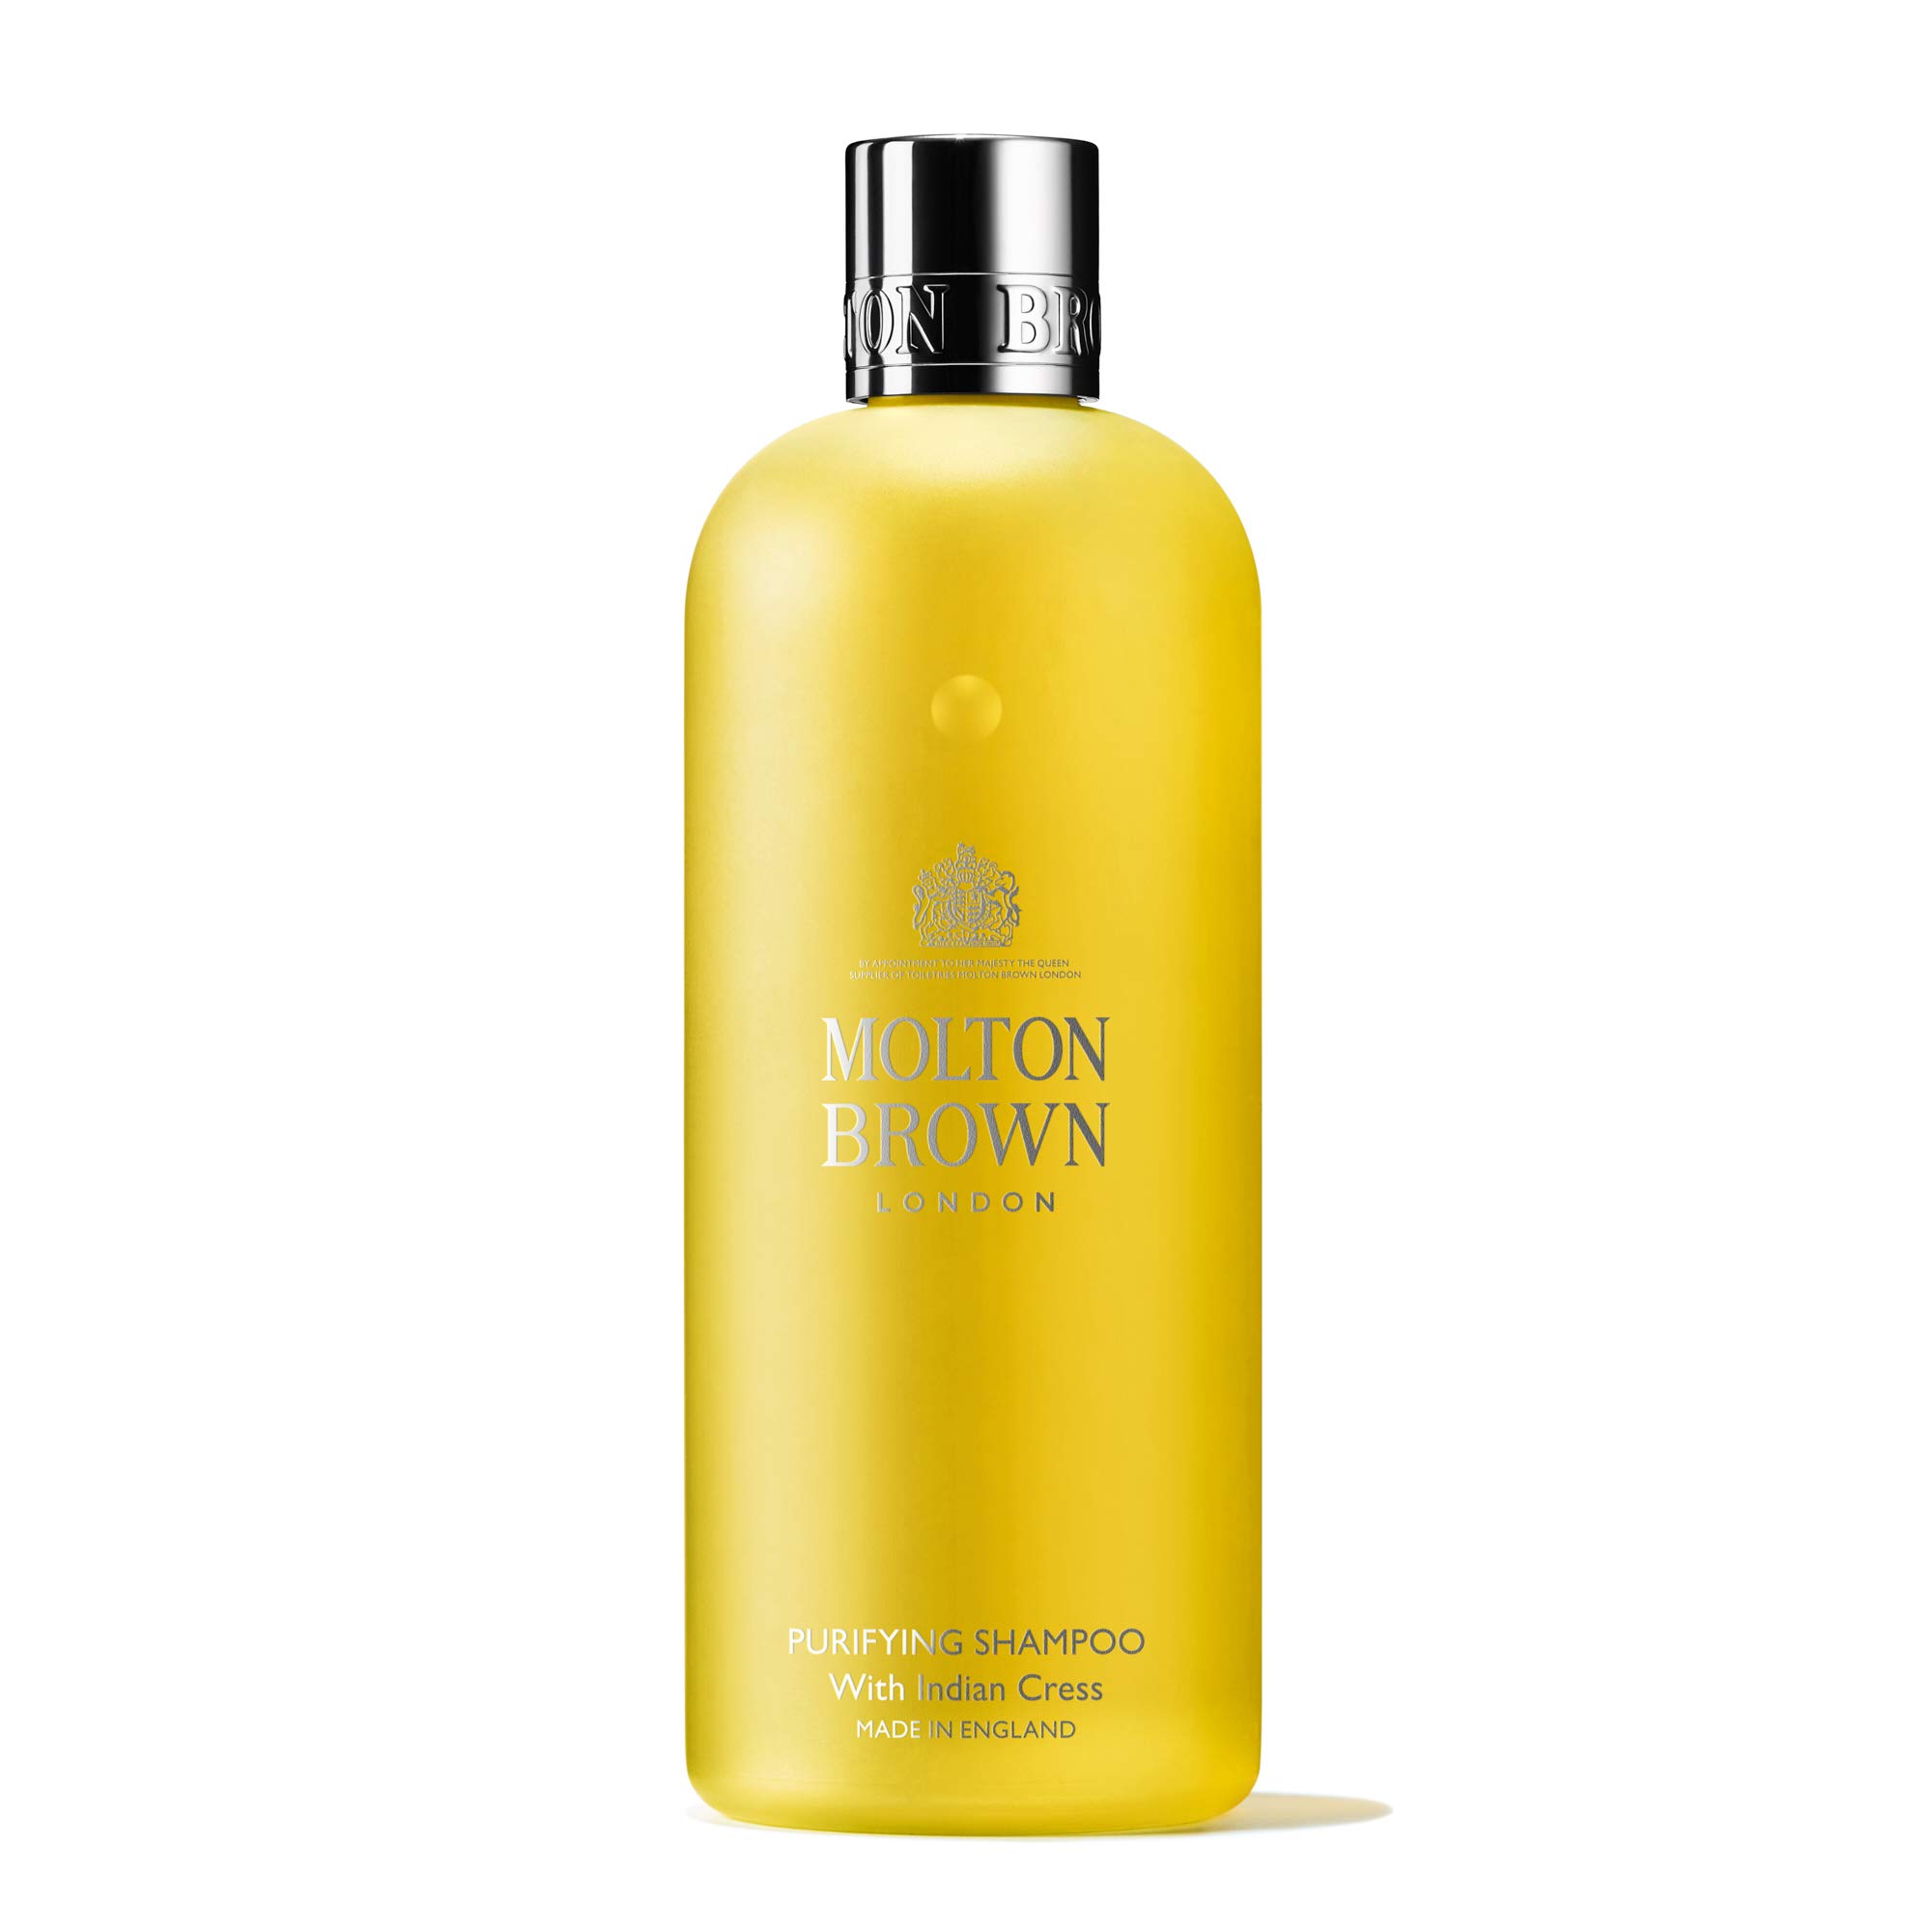 Molton Brown Purifying Shampoo with Indian Cress